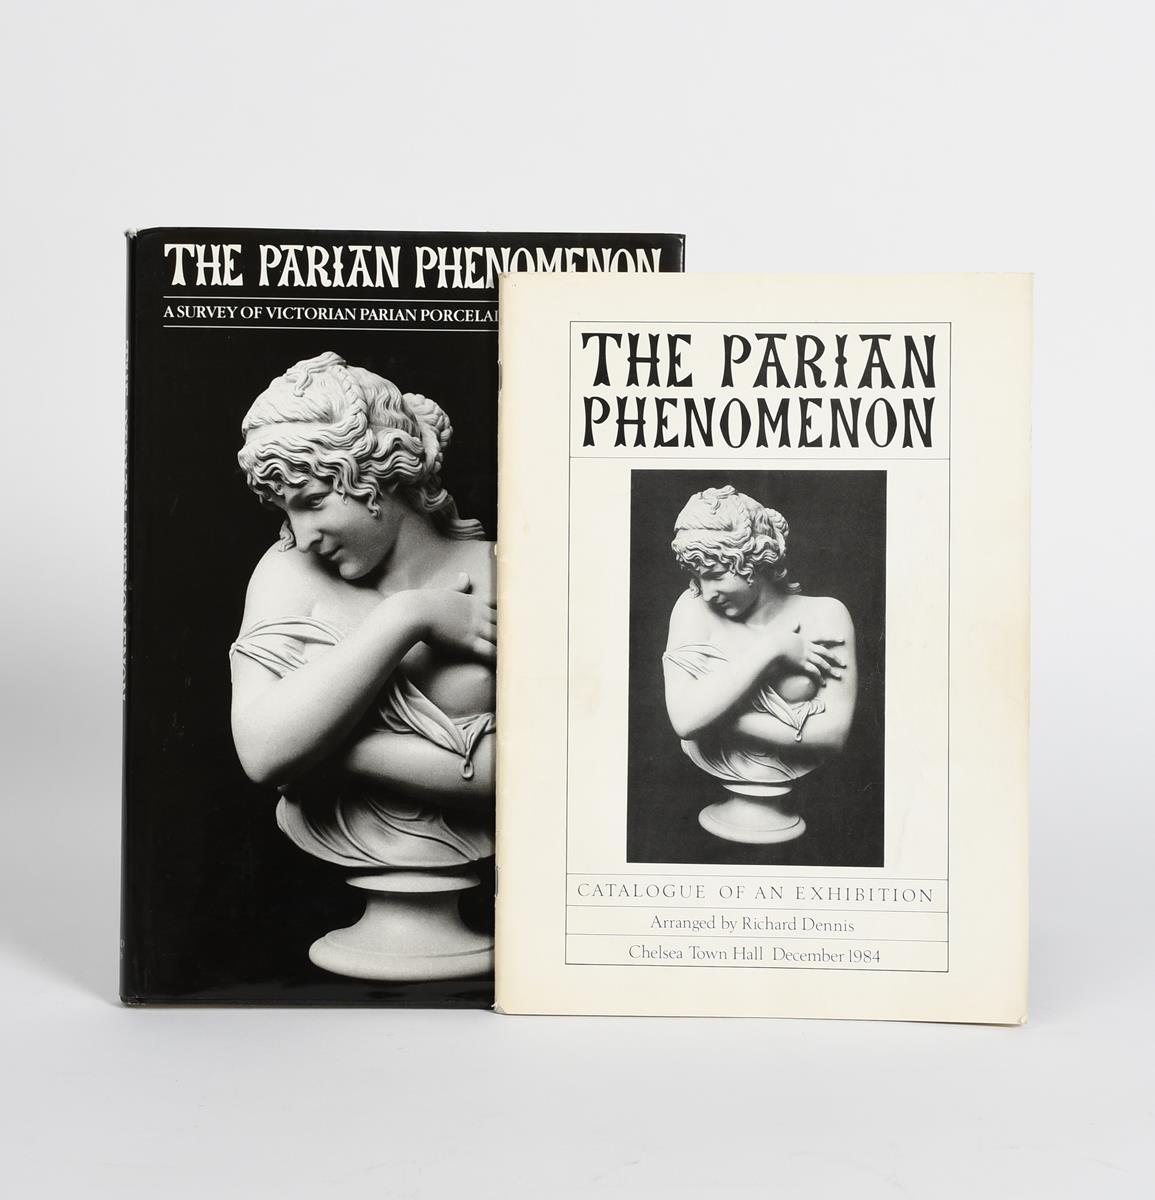 The Parian Phenomenon a reference book edited by Paul Atterbury, published by Richard Dennis